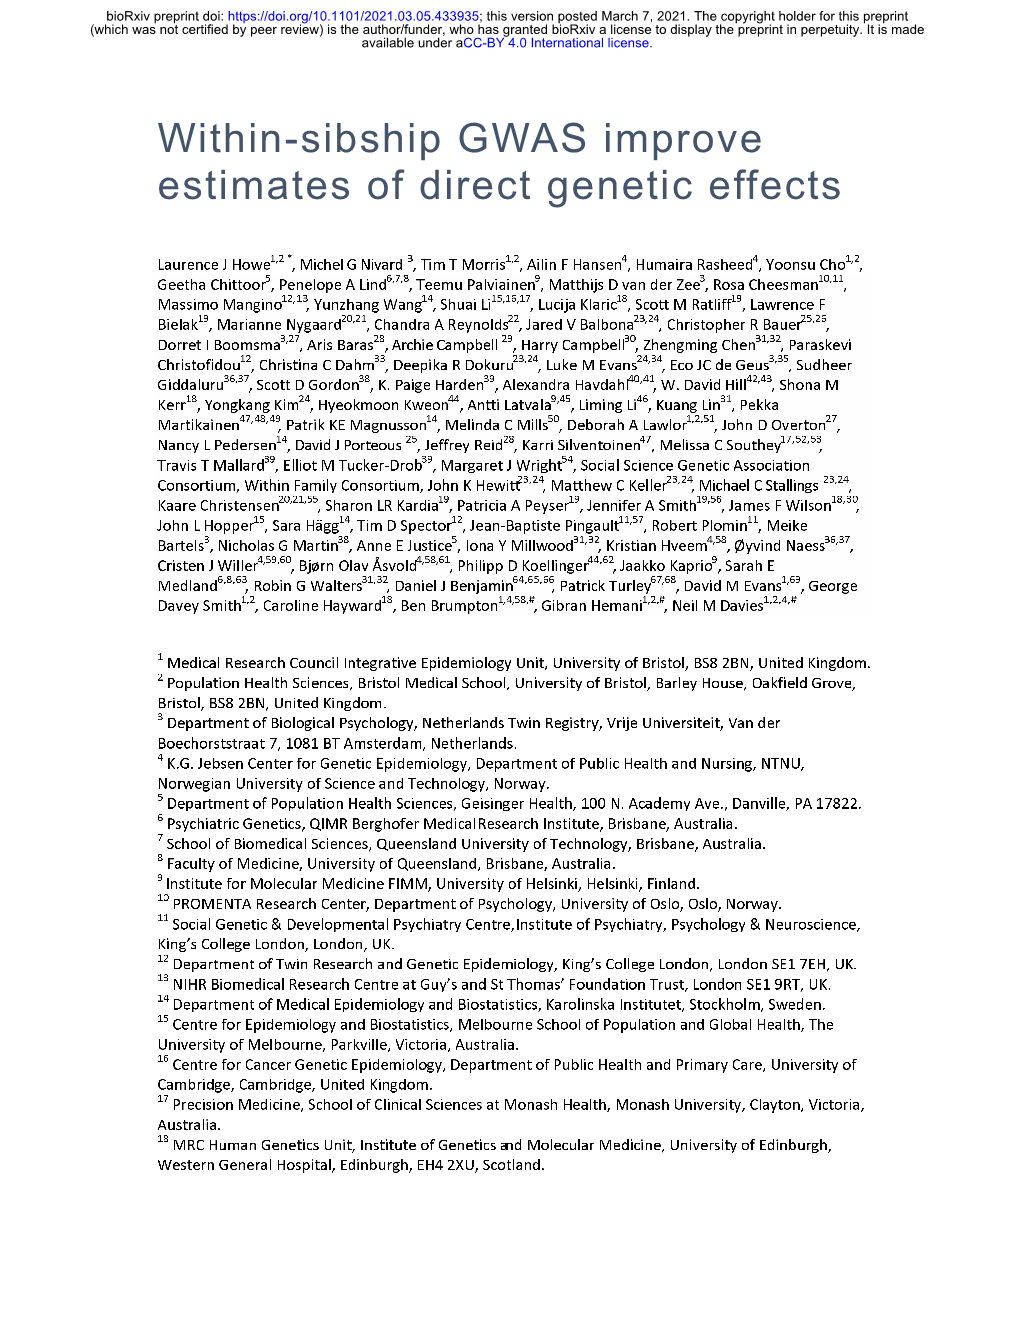 Within-Sibship GWAS Improve Estimates of Direct Genetic Effects